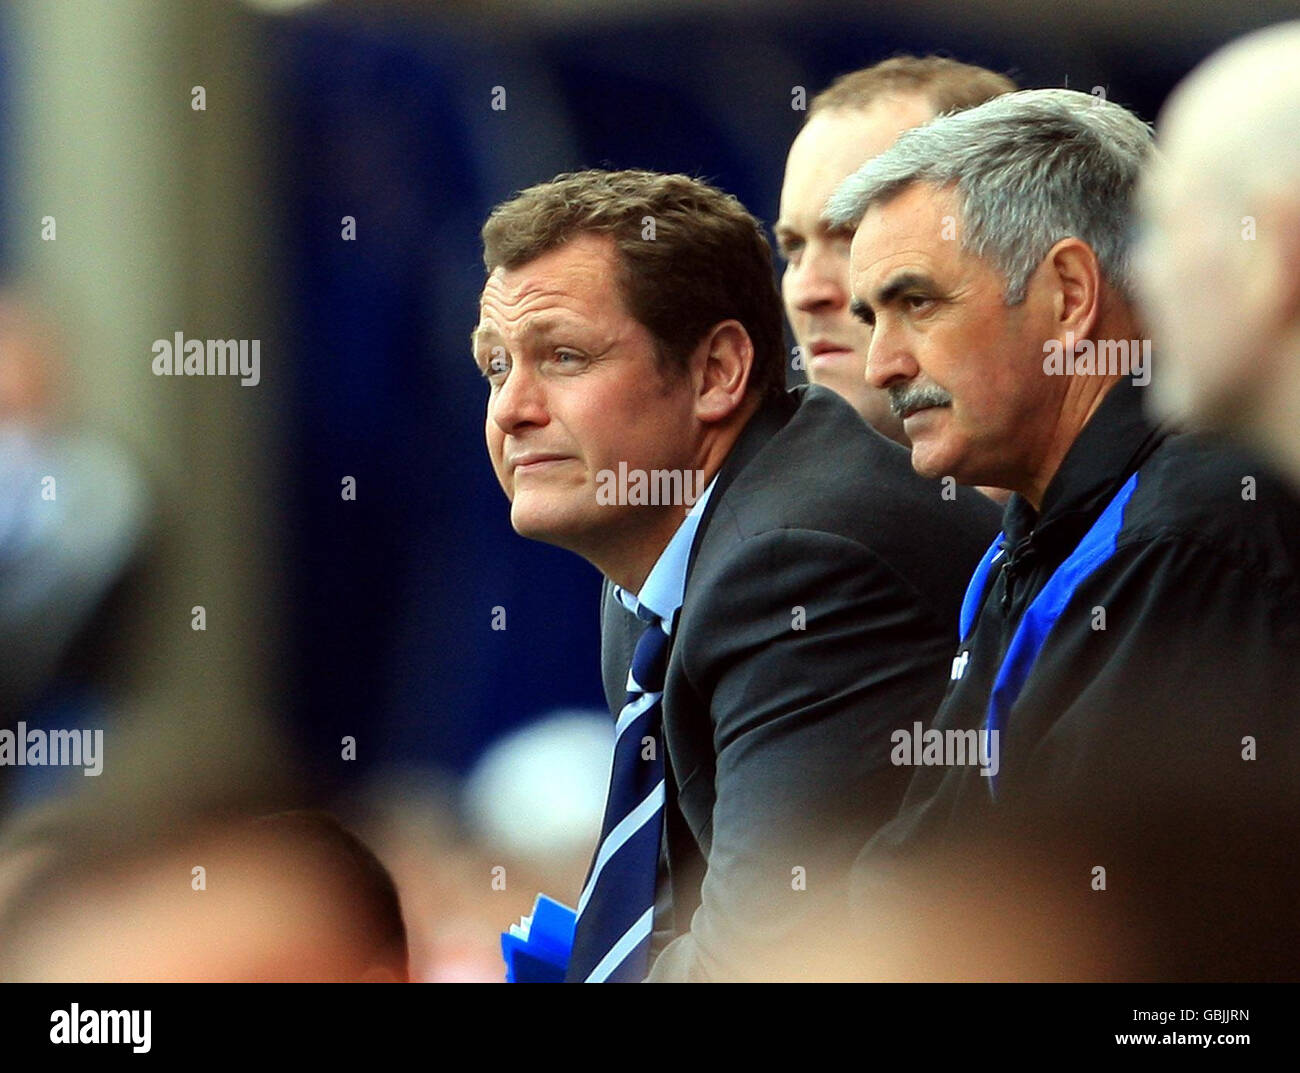 Soccer - Coca-Cola Football League Championship - Ipswich Town v Doncaster Rovers - Portman Road. Ipswich Town's Manager Jim Magilton watches his team lose during the Coca-Cola Football League Championship match at Portman Road, Ipswich. Stock Photo